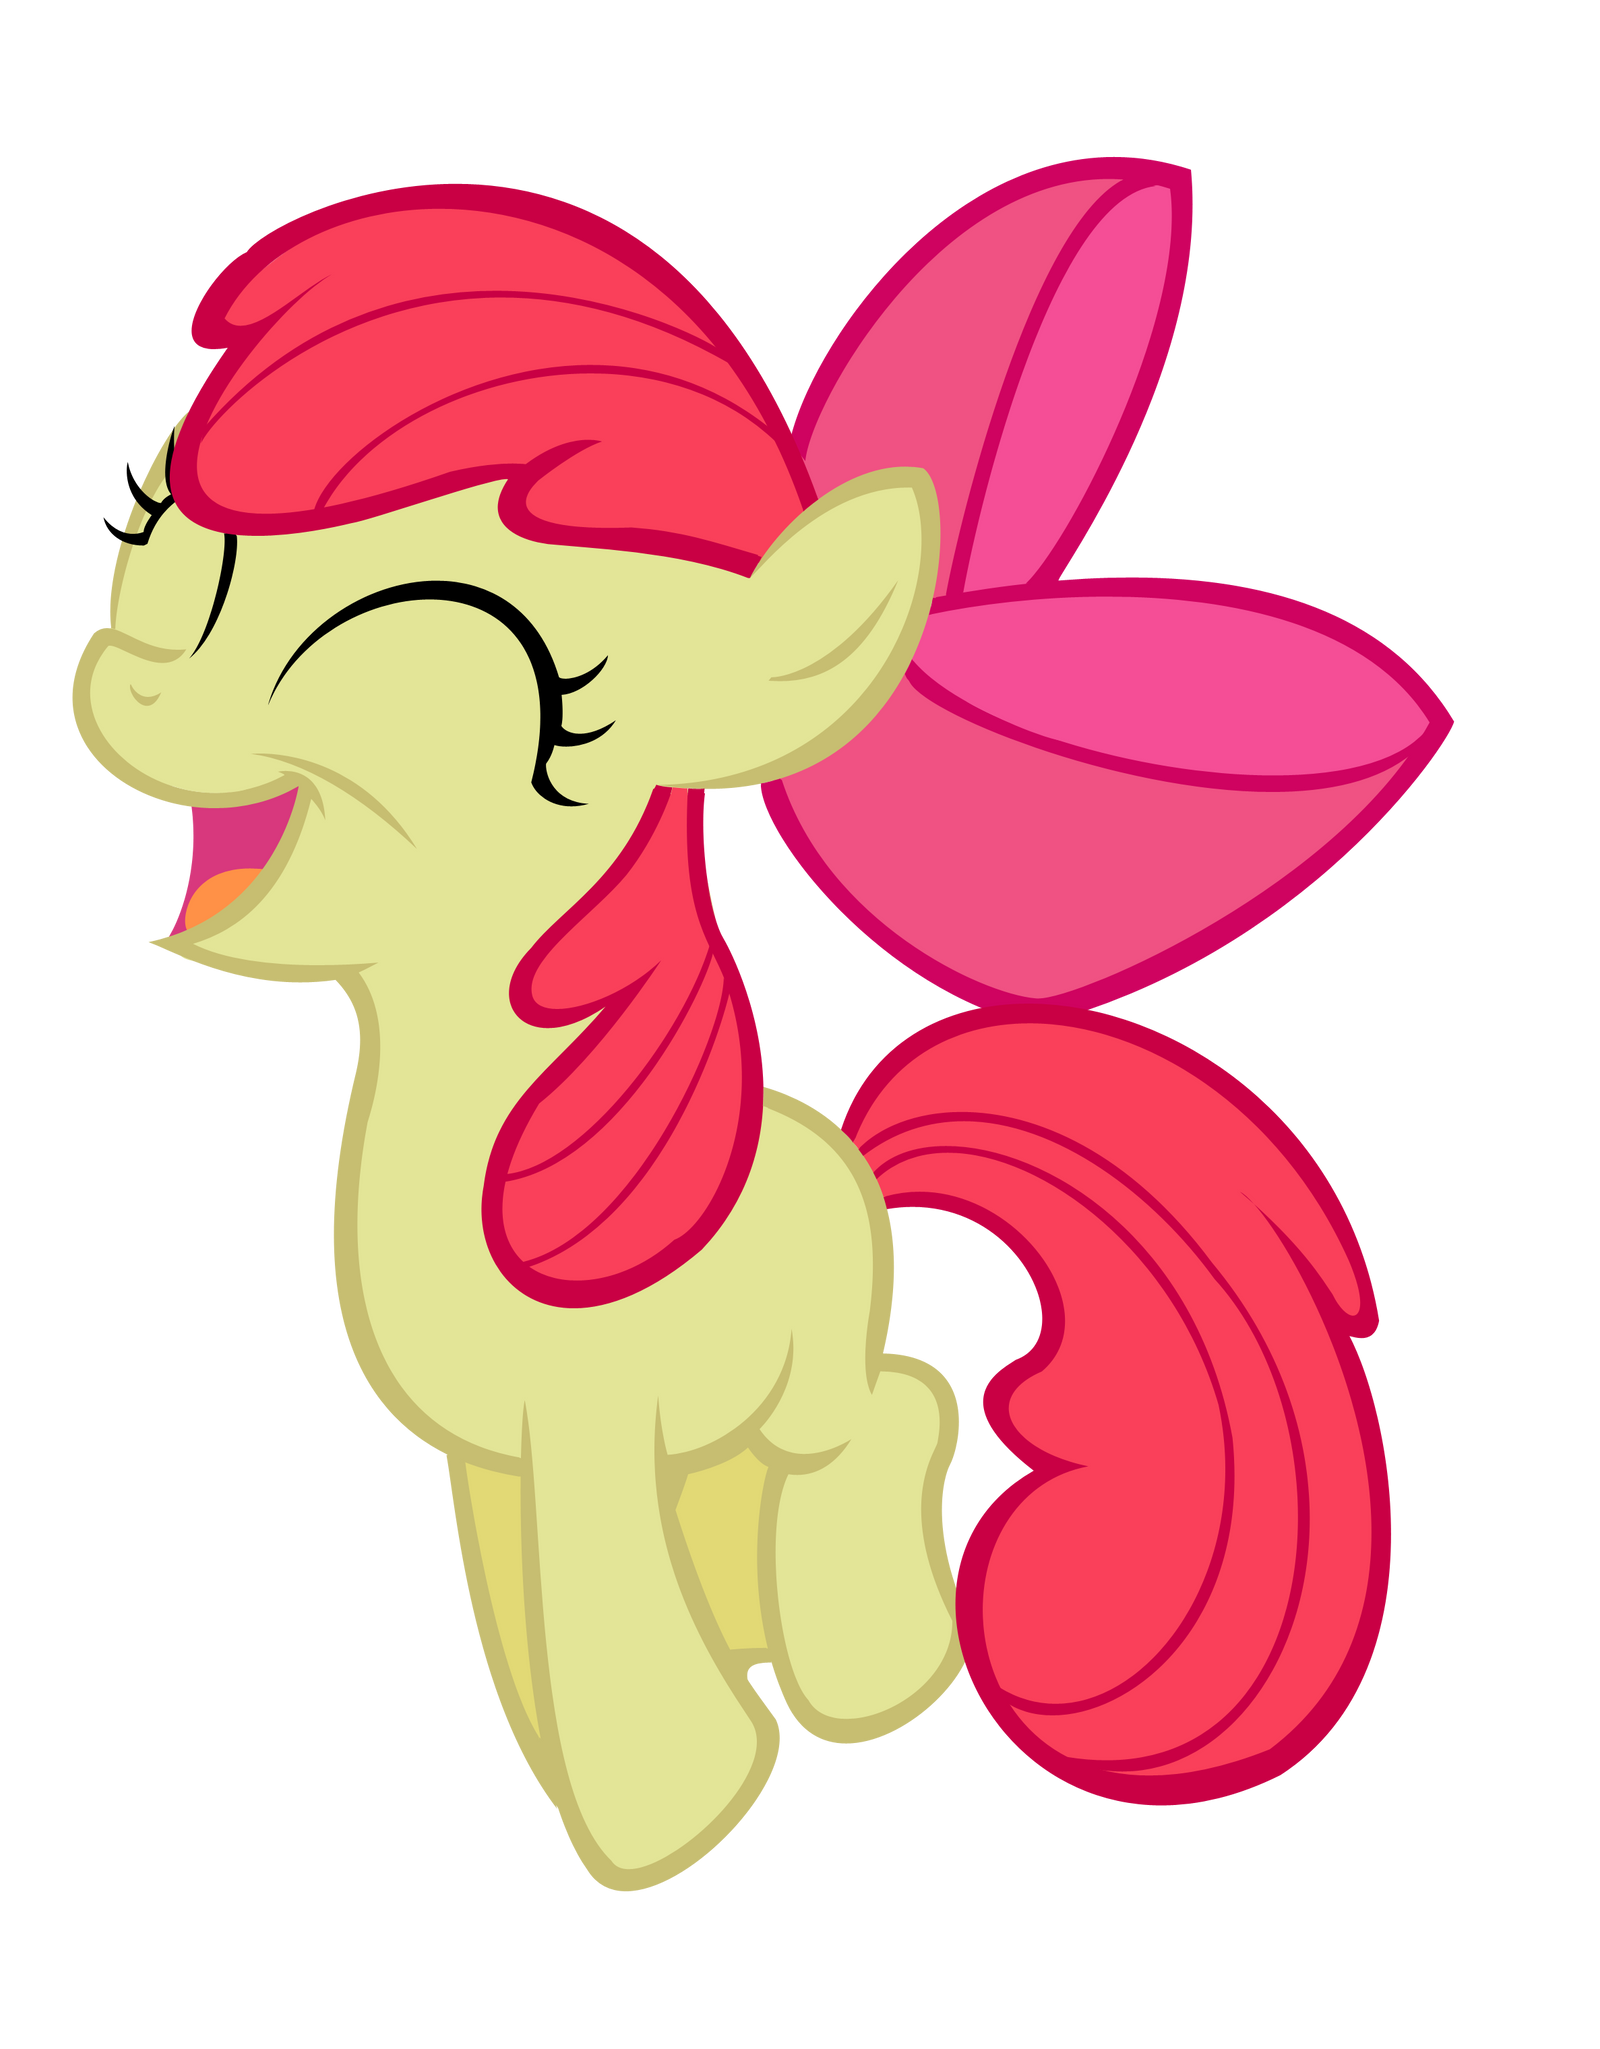 happy_jumping_applebloom_vector_by_saturtron-d4o8zy3.png